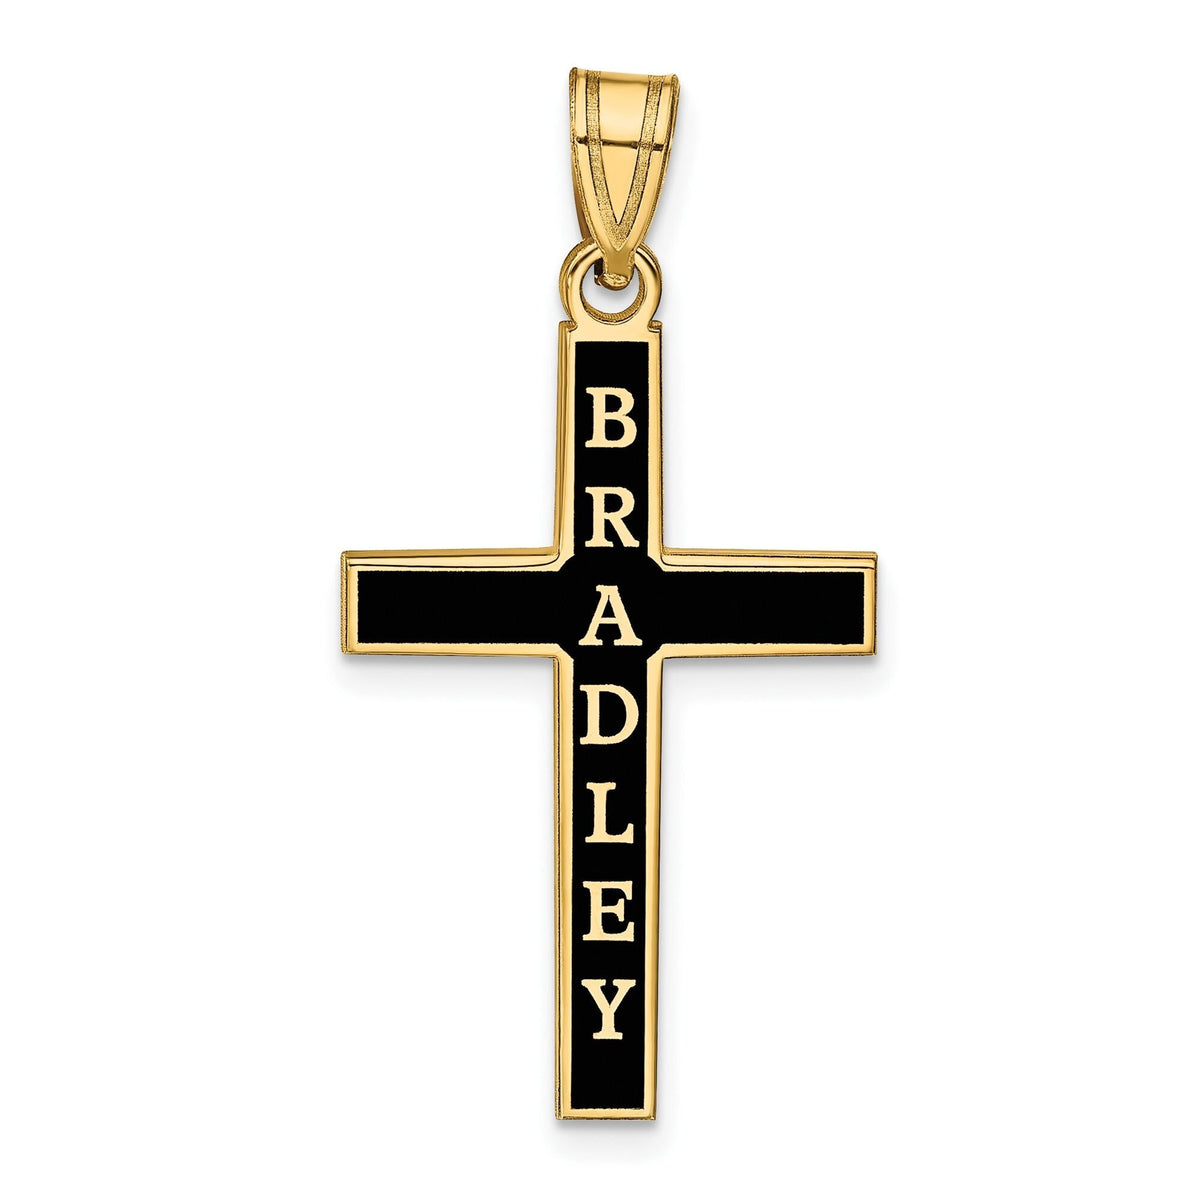 Personalized Cross with Black Enamel Antique Letters (1.25 inches Tall) & Necklace included  in Sterling Silver , Gold Plated or 10k Gold